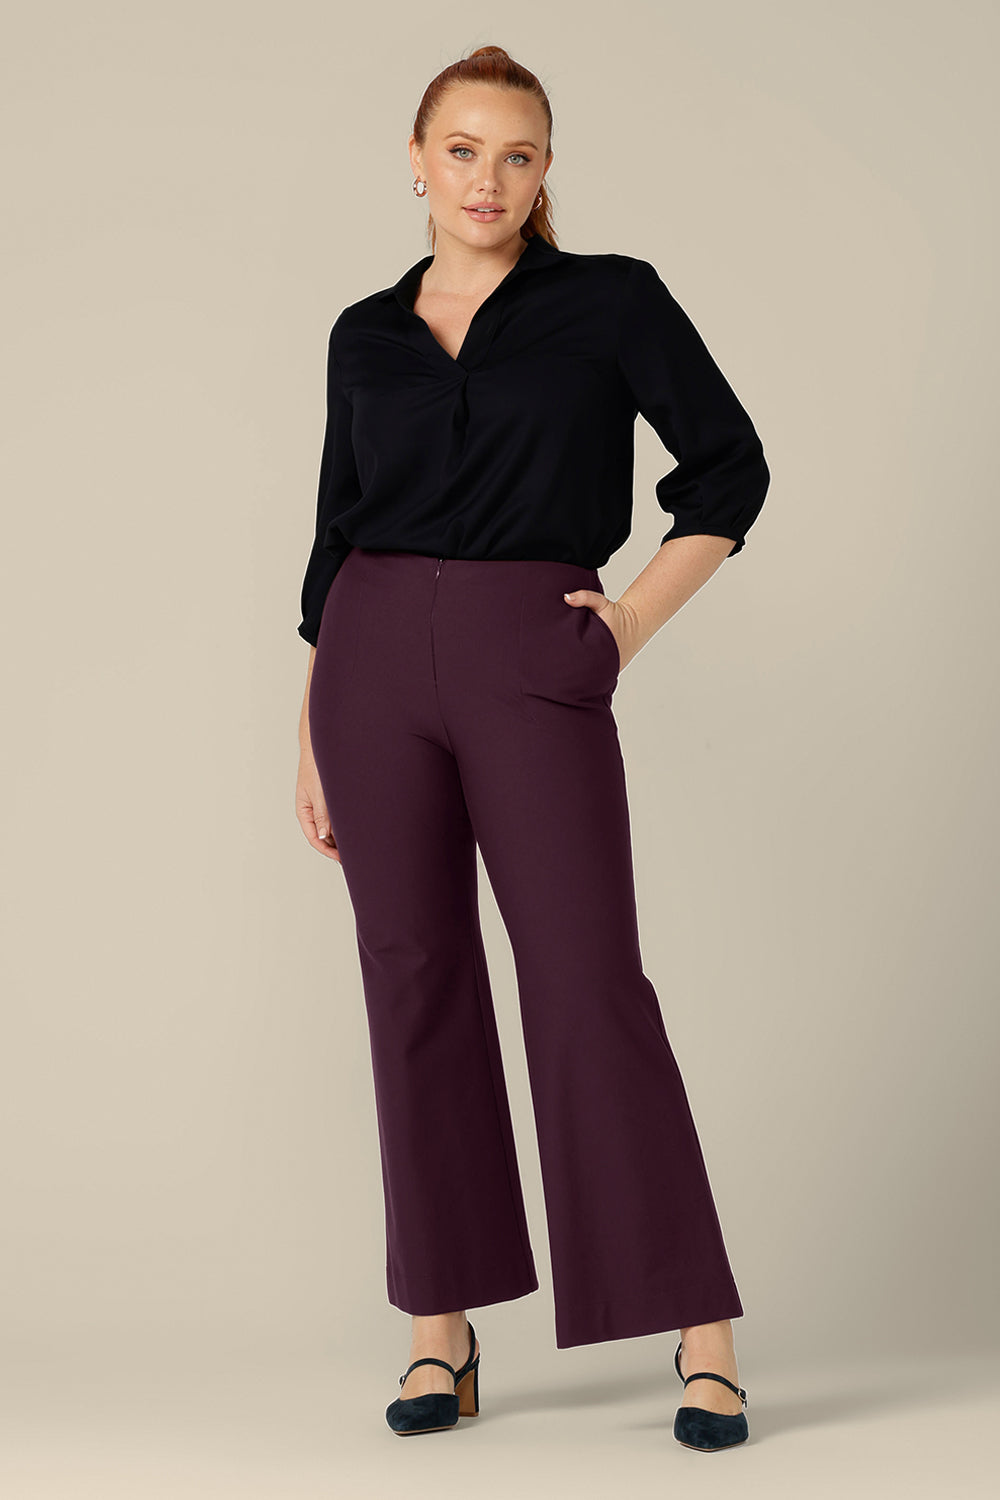 Good for workwear or evening wear pants, these mulberry trousers by Australia and New Zealand women's fashion label, L&F feature full-length, boot-cut flared legs. Worn with a black pull-on shirt for elegant workwear style